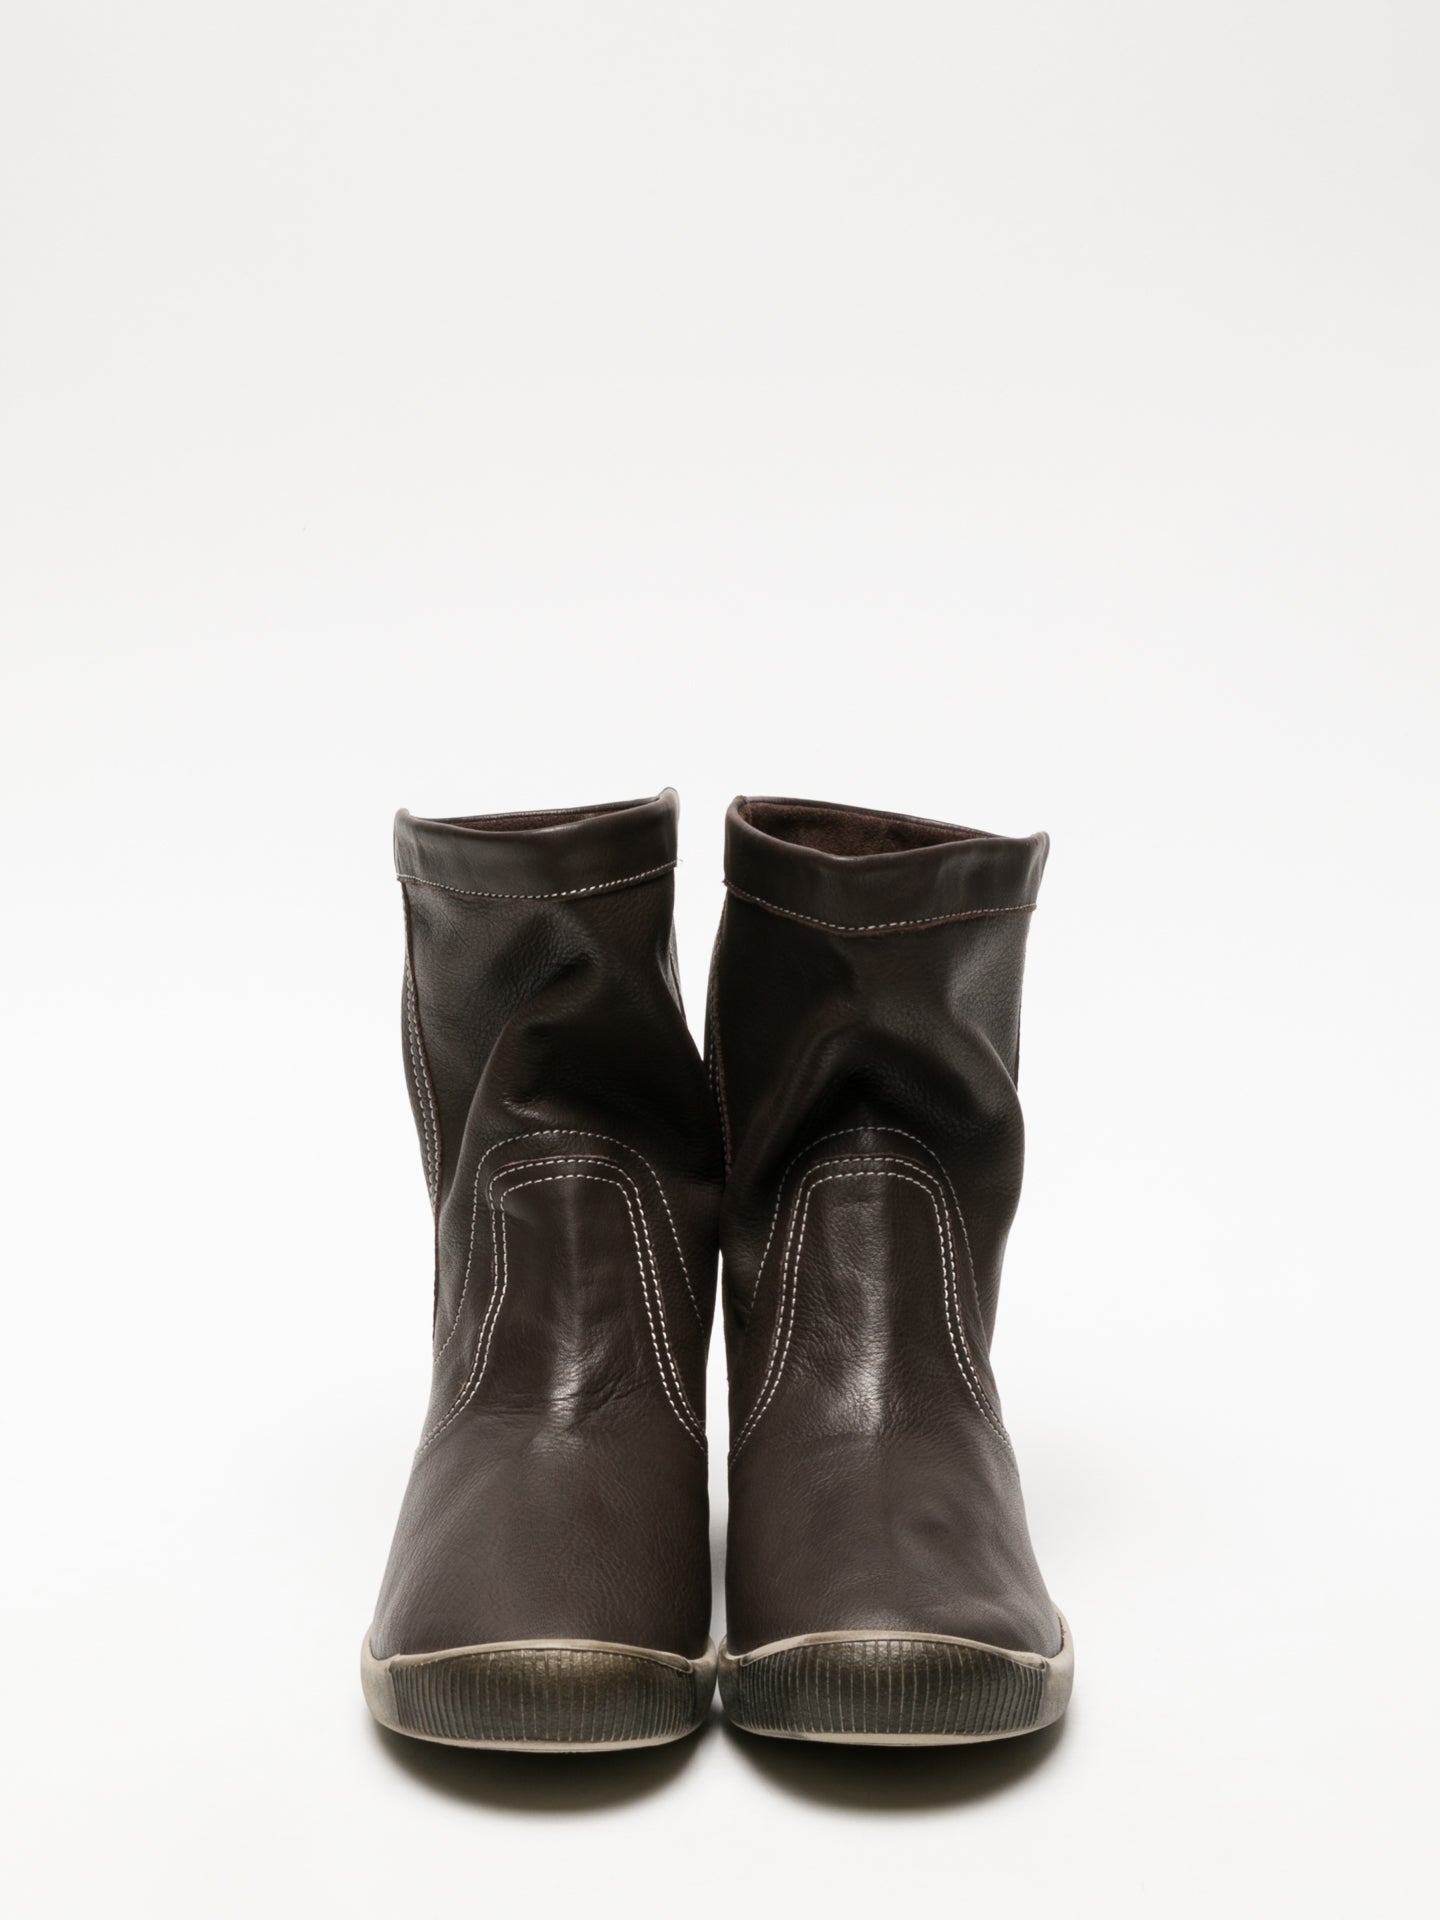 Softinos Brown Round Toe Ankle Boots